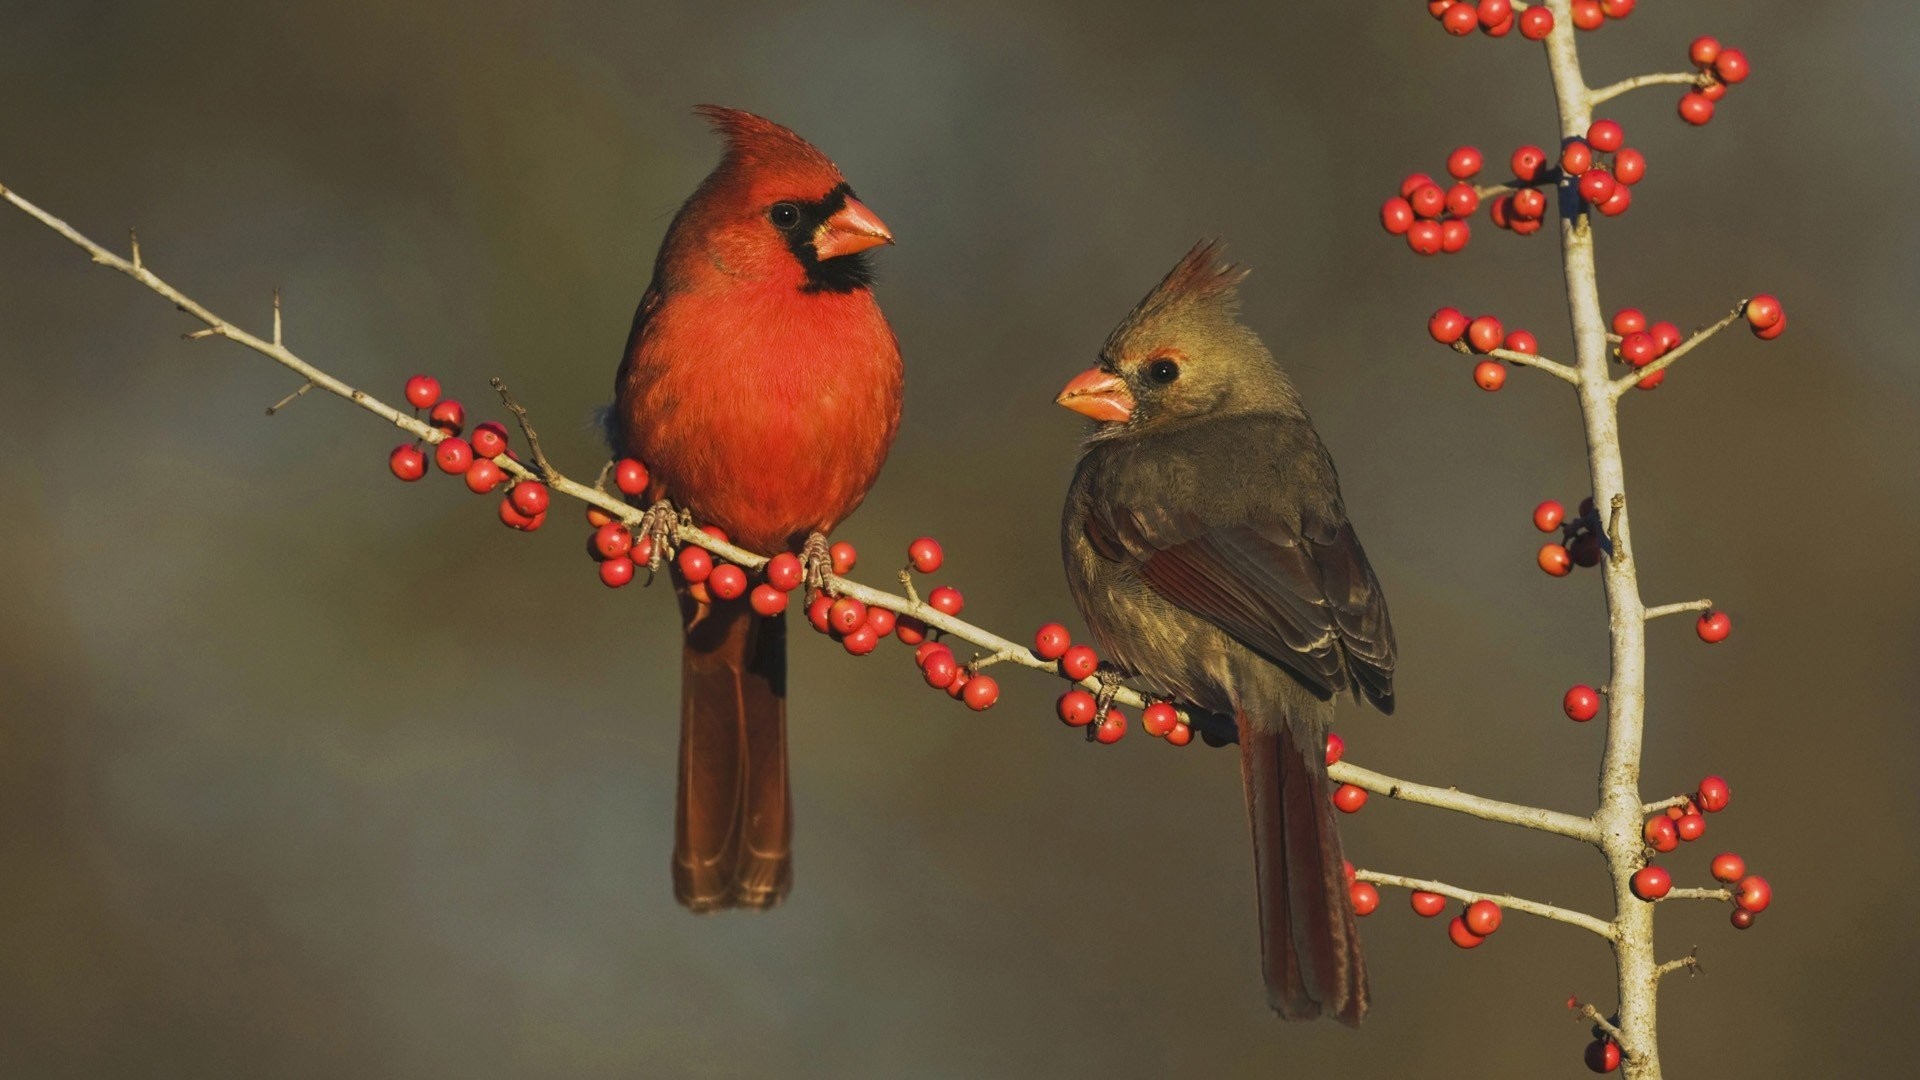 1920x1080 Eating Tag - Country Berries Texas Eating Cardinal Water Birds Image for HD  16:9